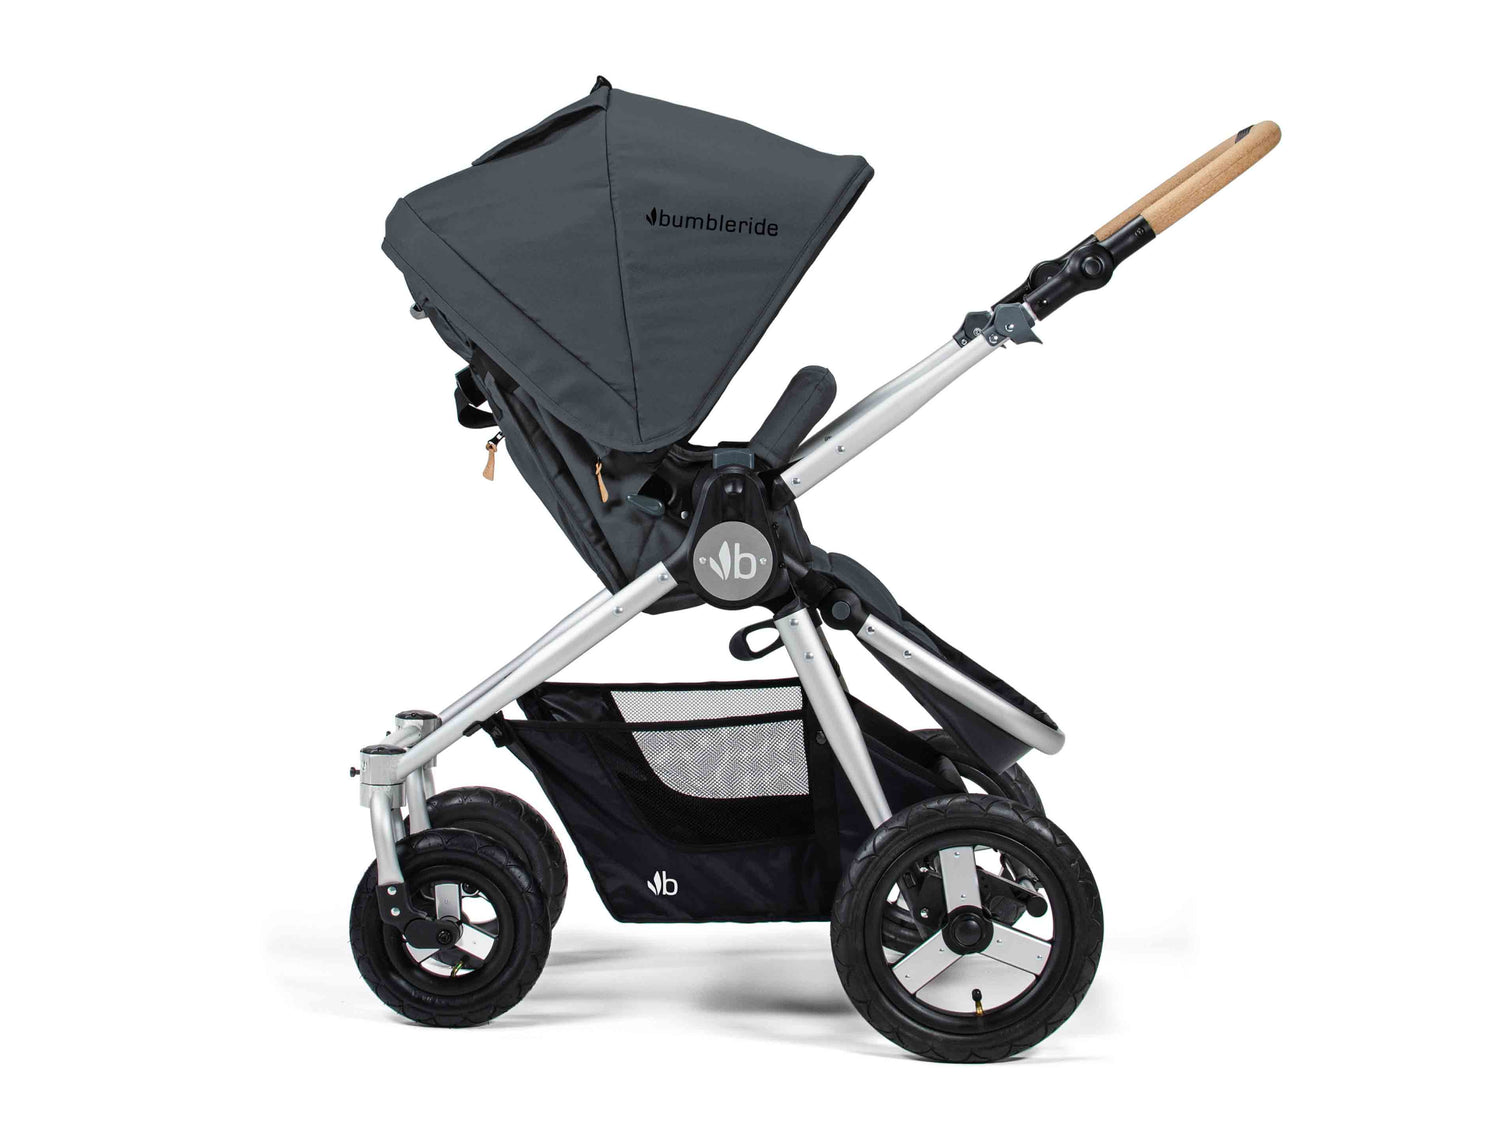 graco roadmaster review